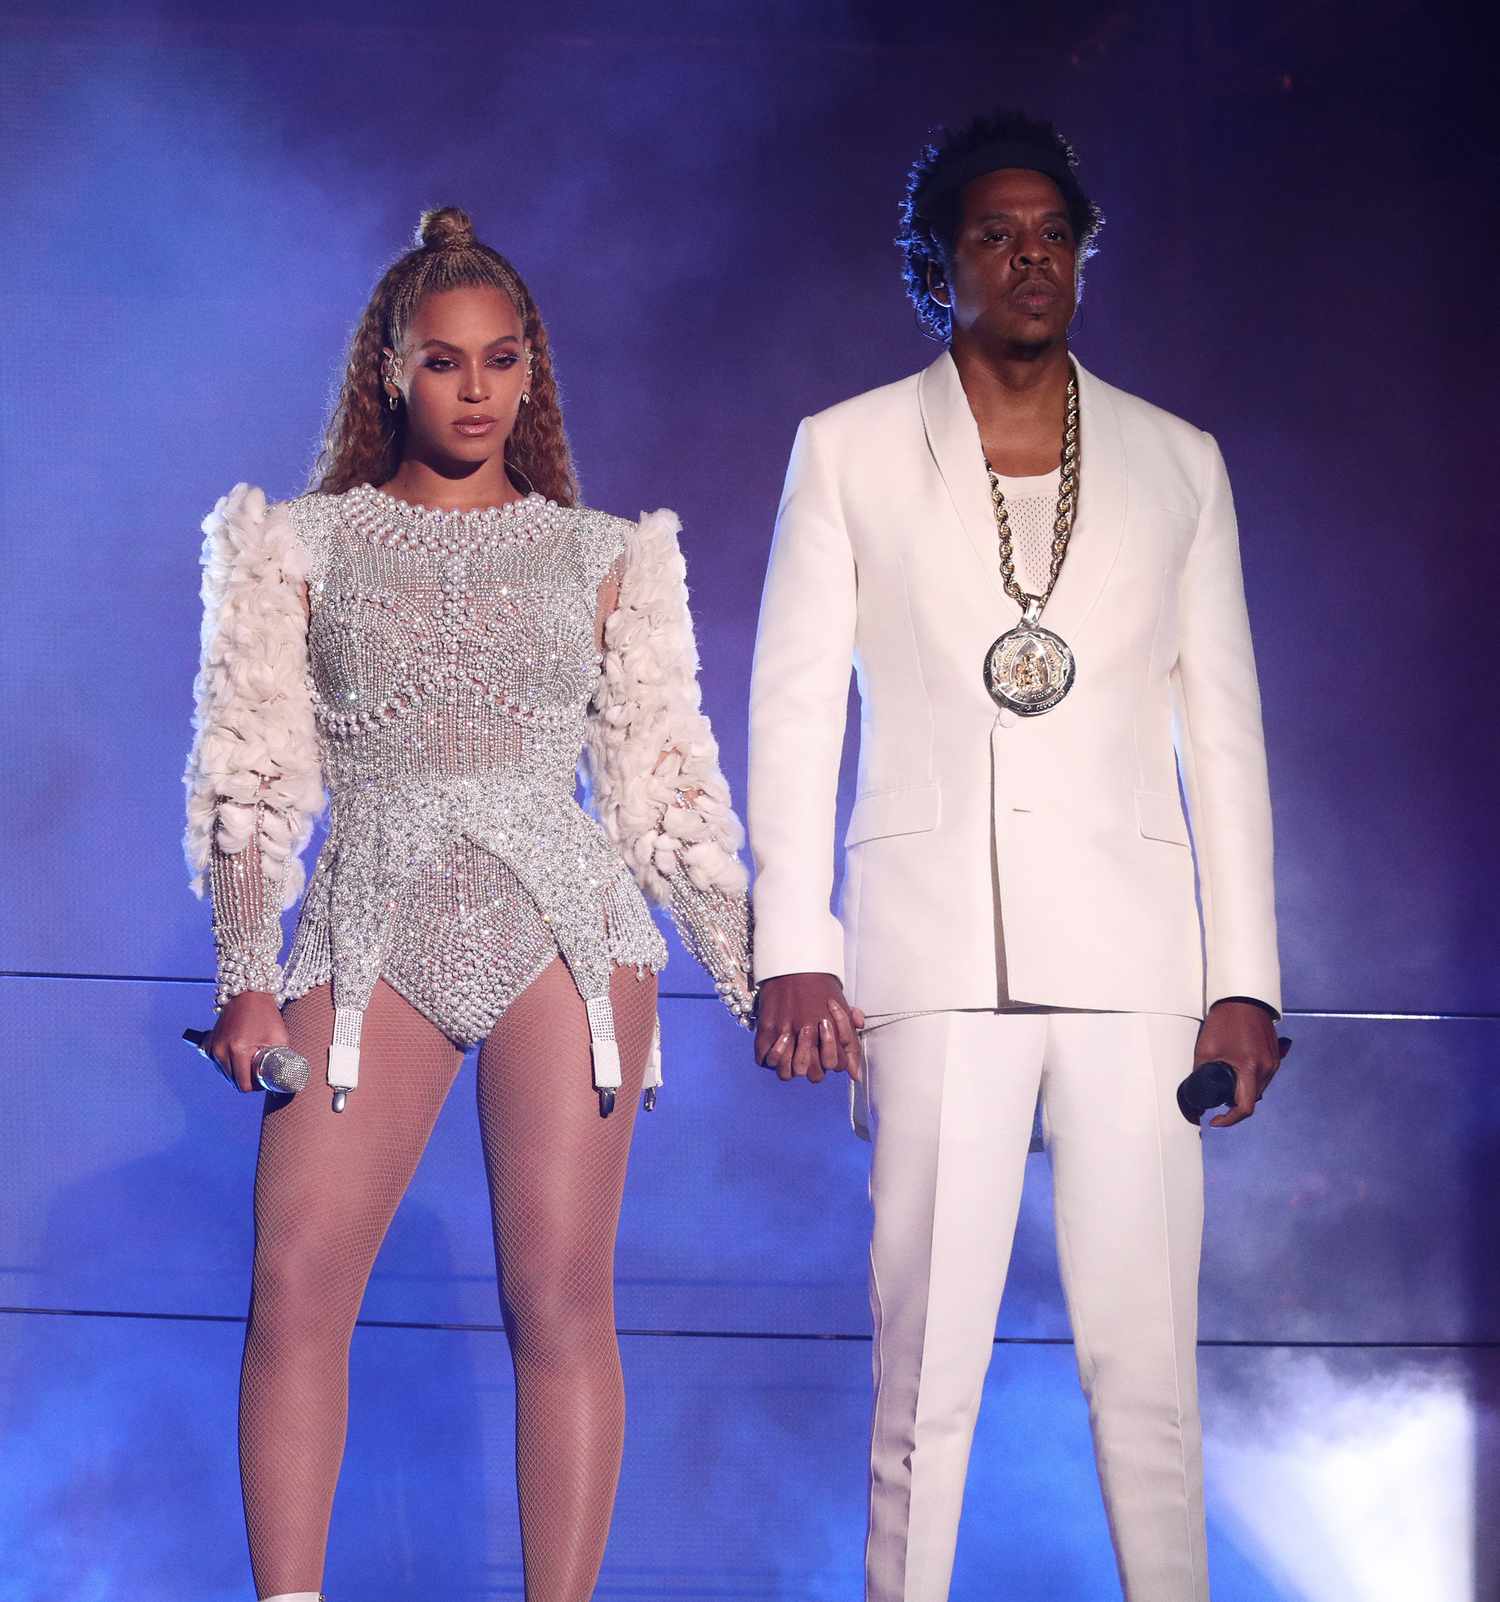 Beyonce and Jay-Z in concert, 'On The Run II Tour', Minneapolis, USA - 08 Aug 2018